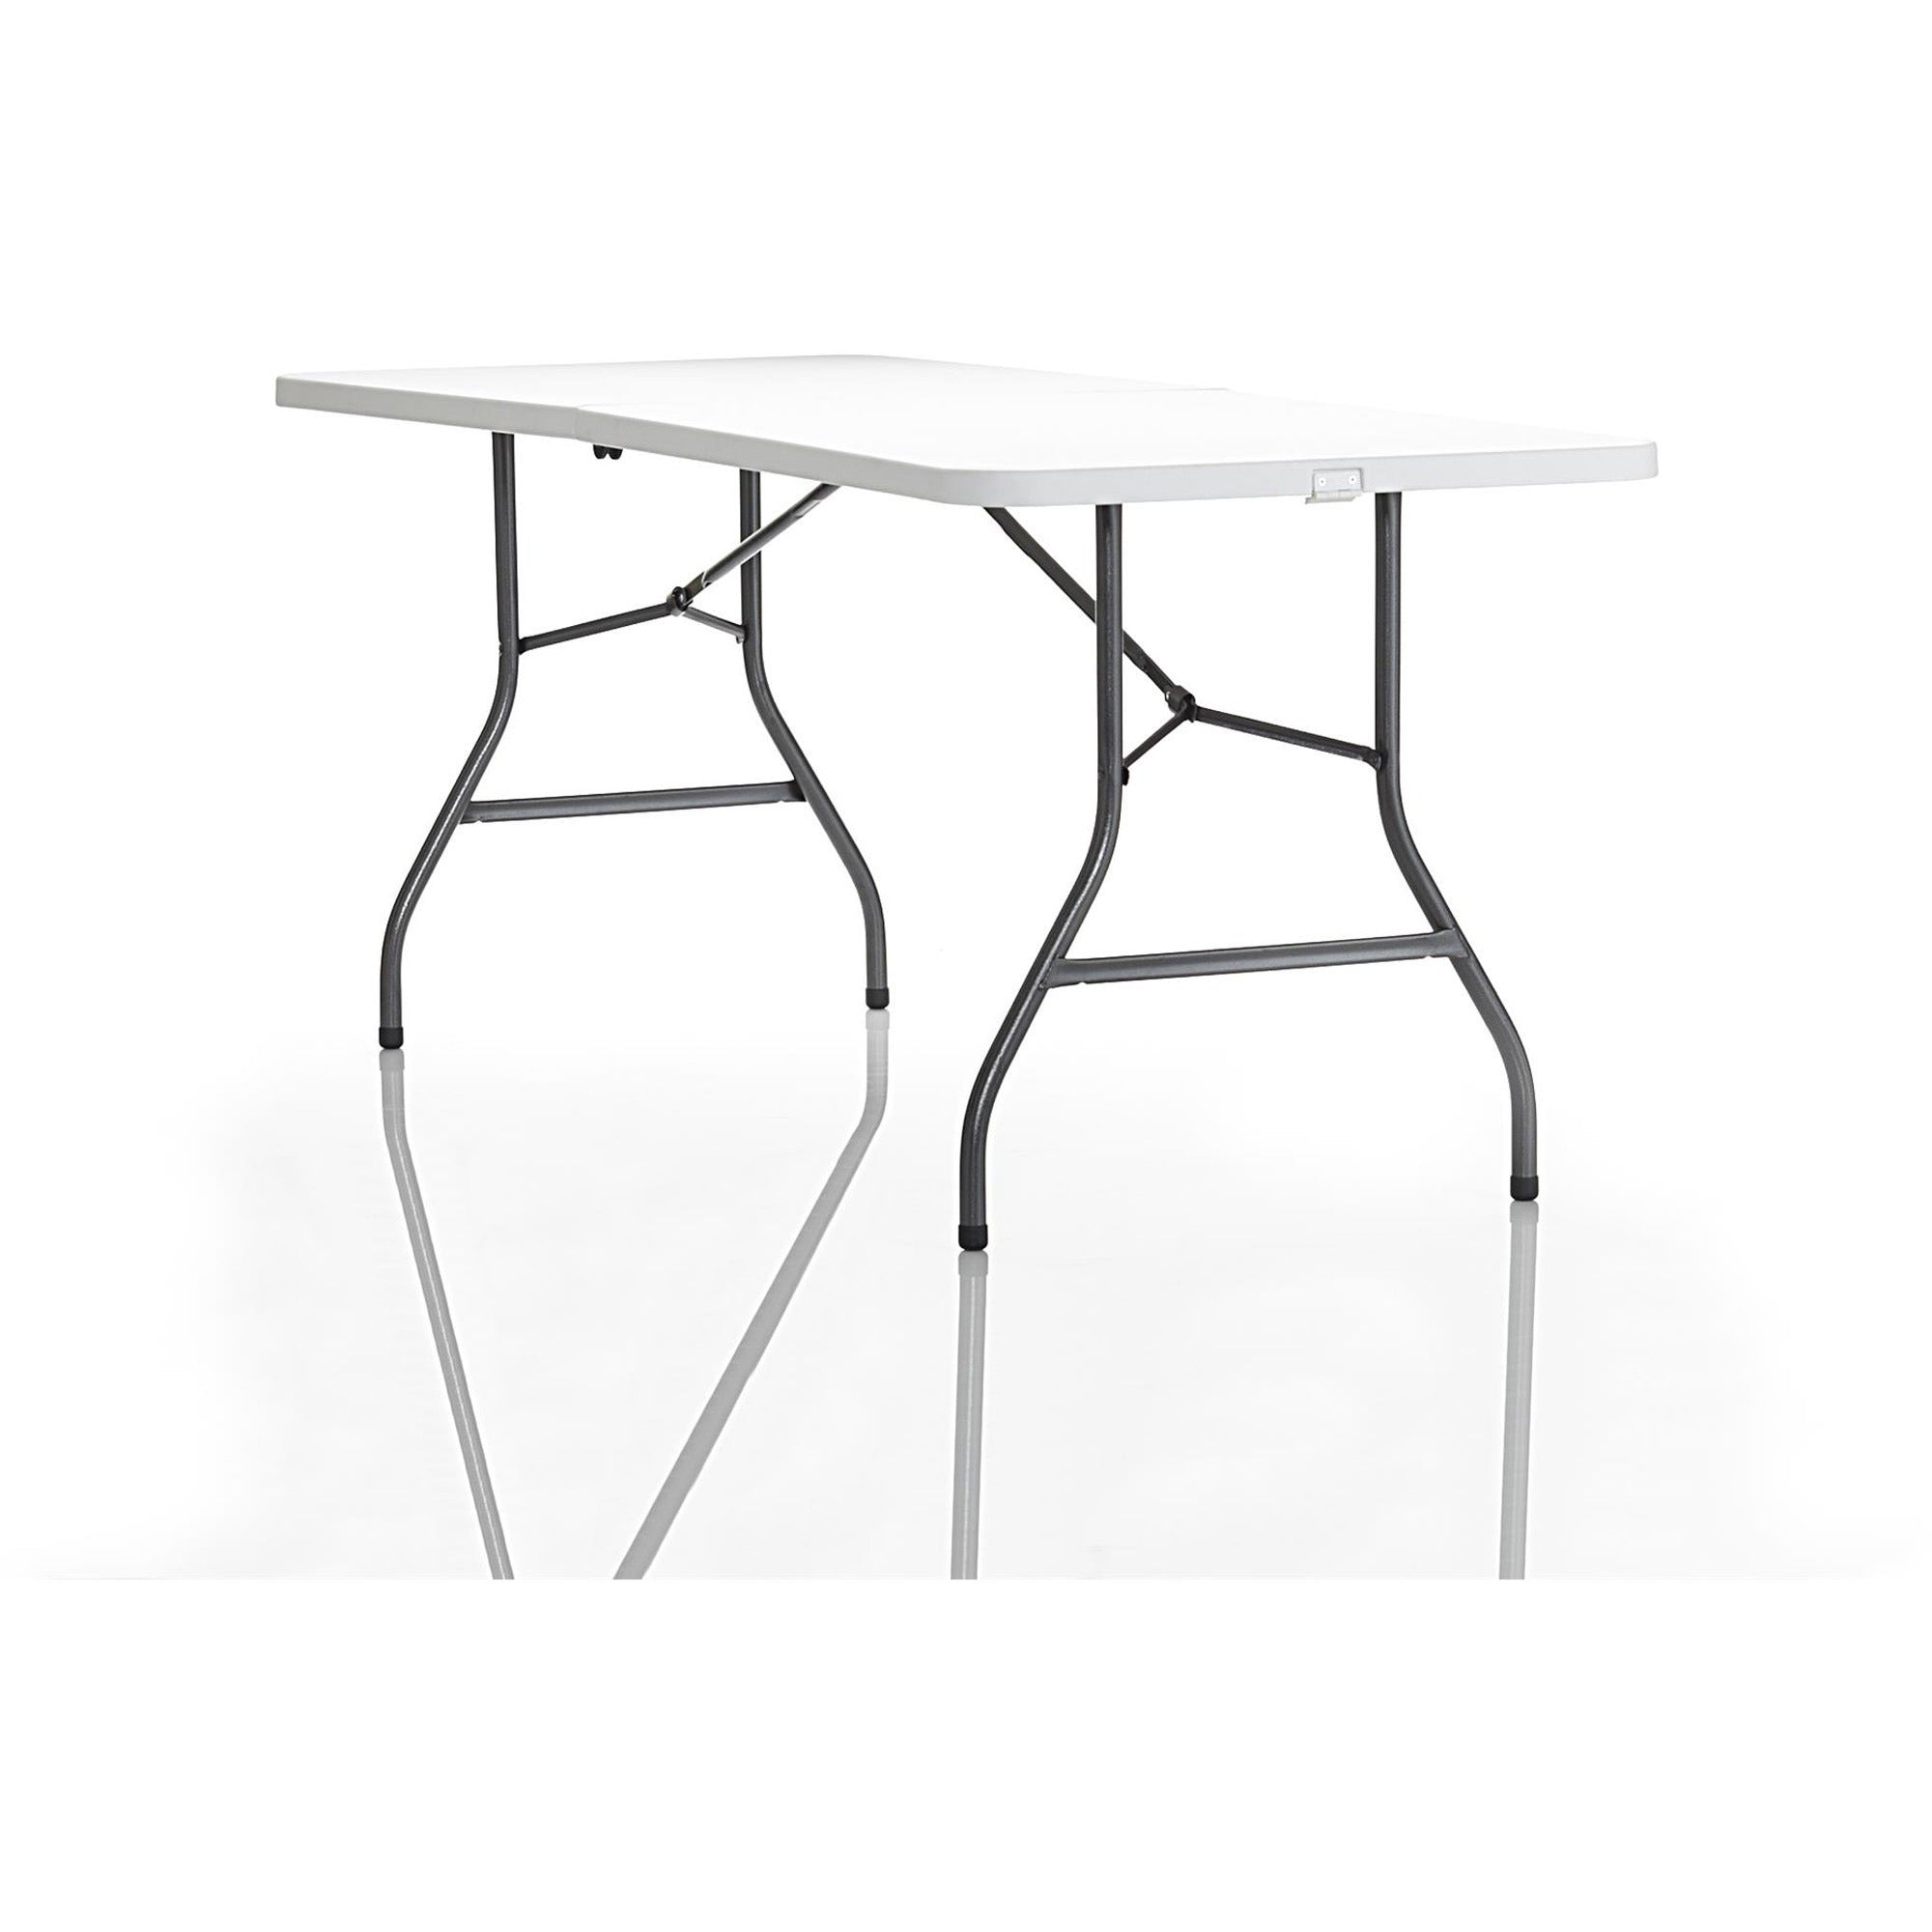 cosco-6-foot-centerfold-blow-molded-folding-table-for-table-toprectangle-top-folding-base-x-2963-table-top-width-x-72-table-top-depth-2925-height-white-1-each_csc14678wsp1 - 4